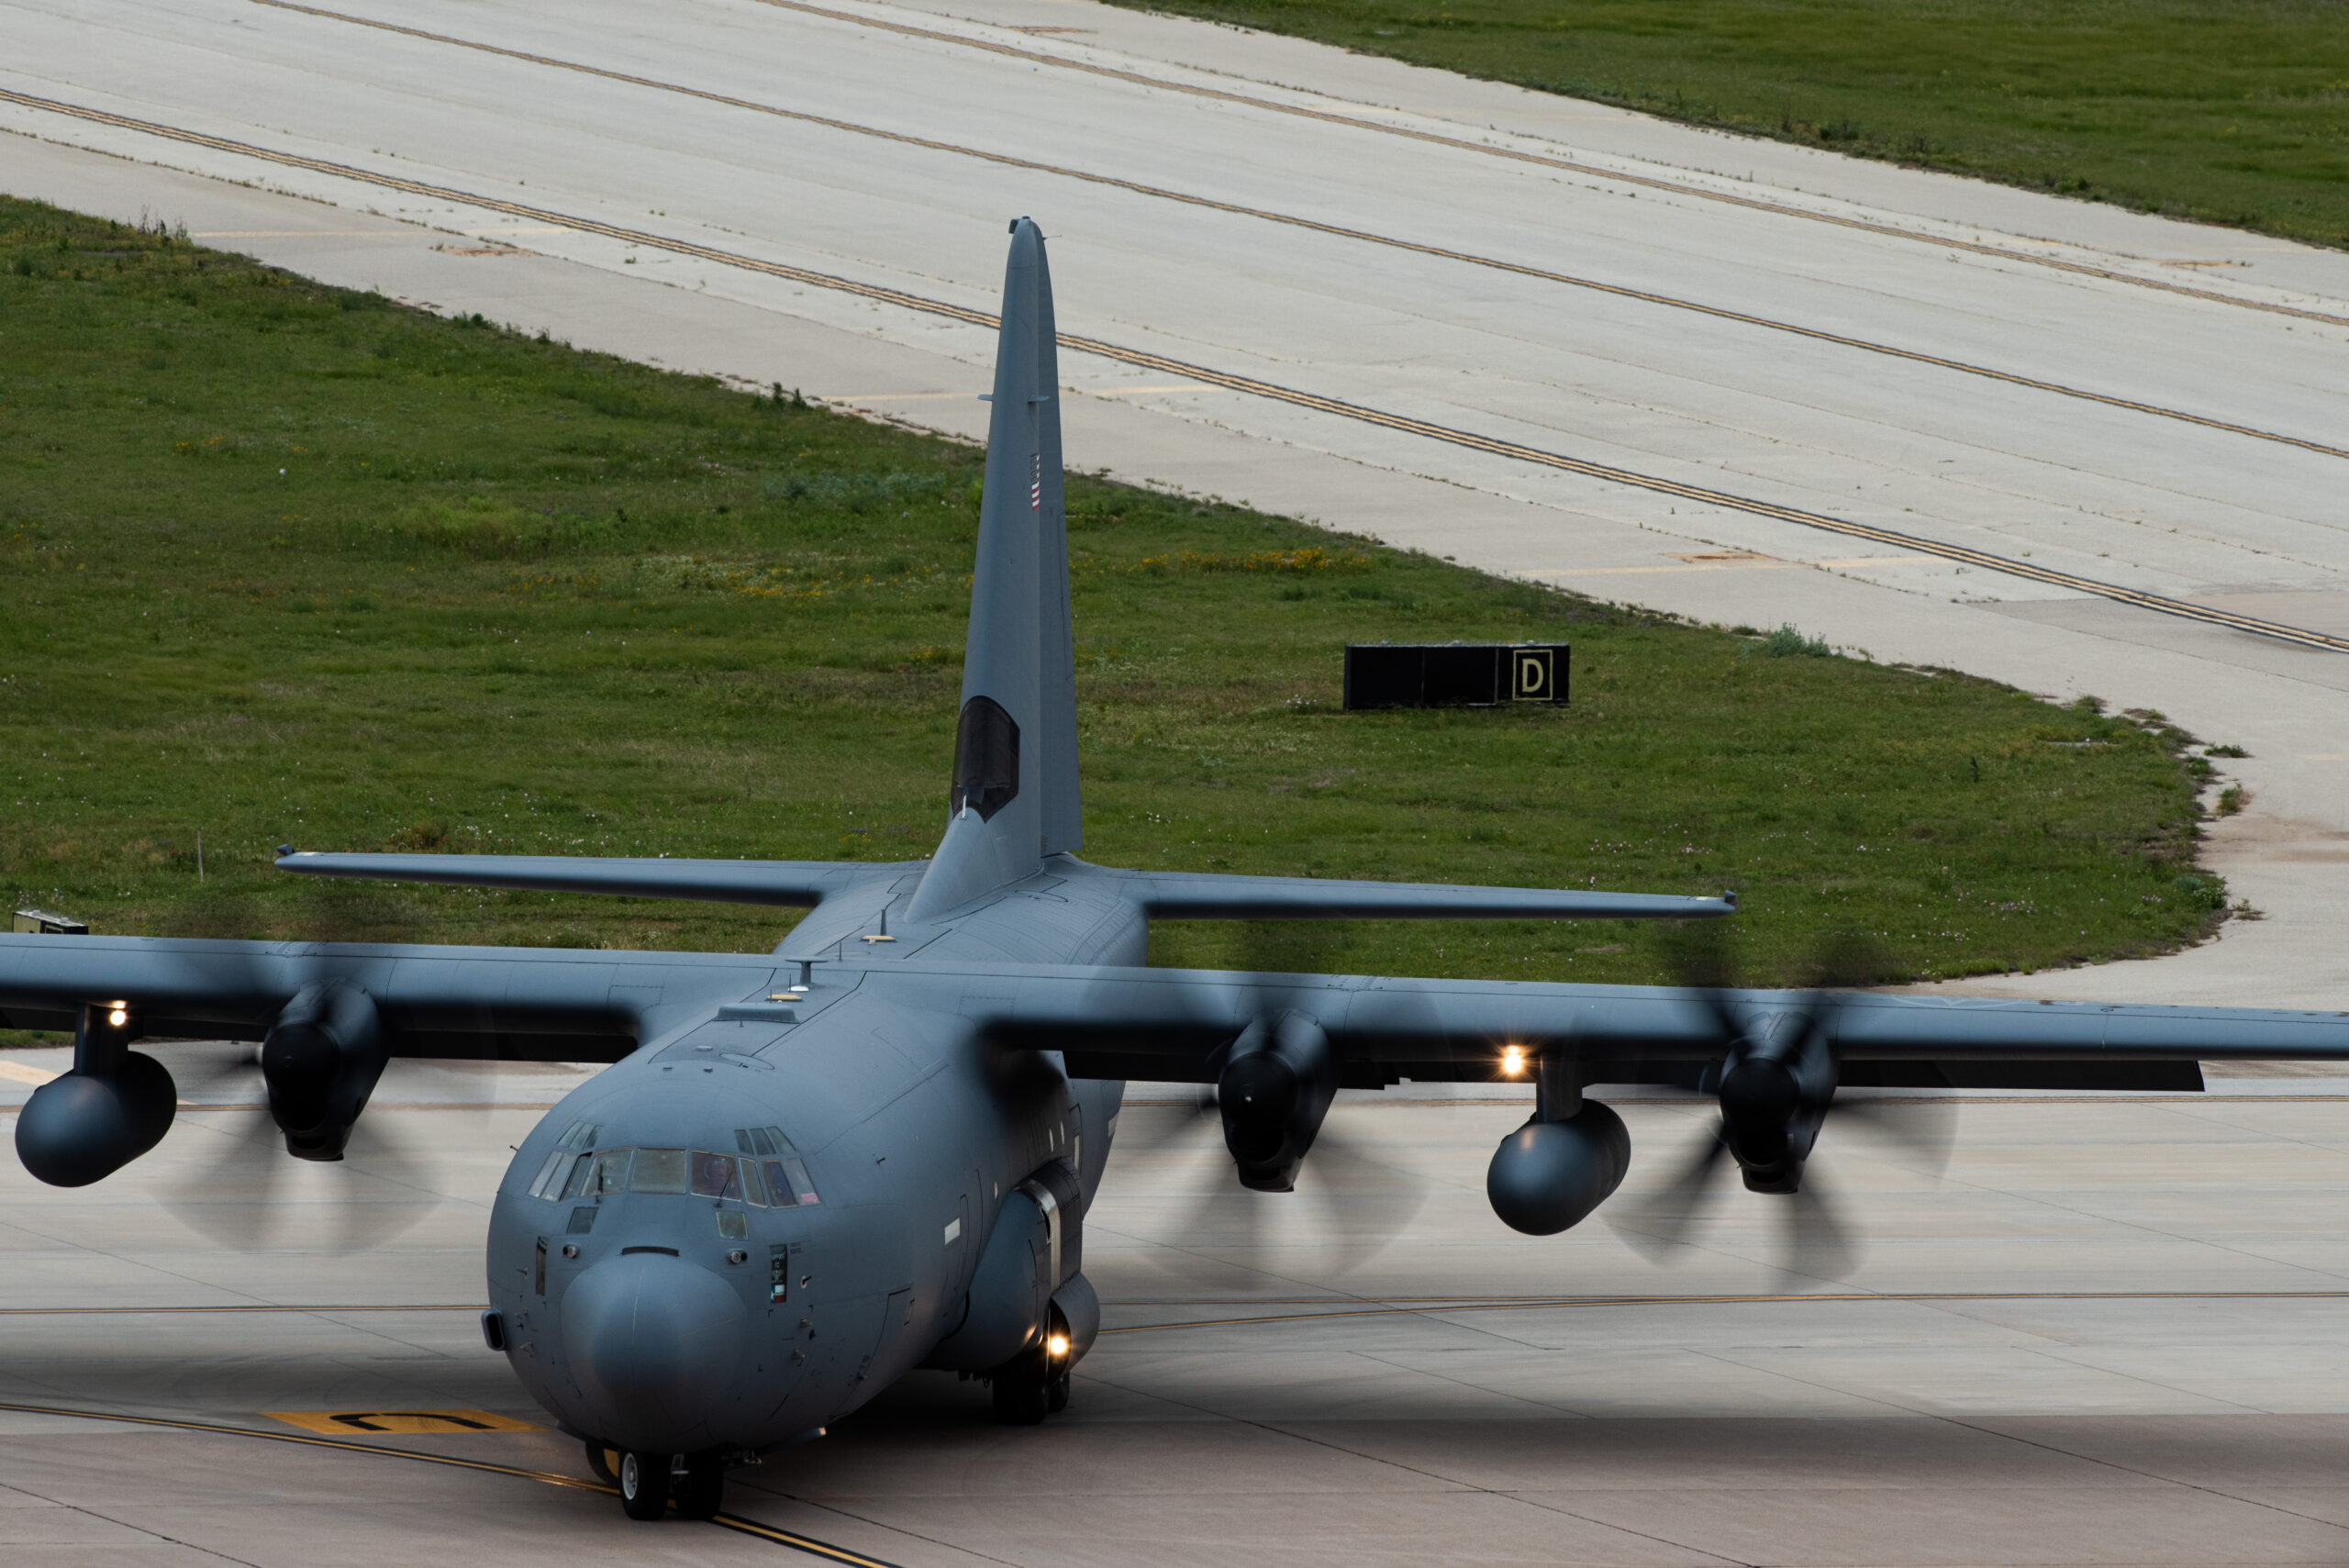 A C-130J Super Hercules prepares to taxi at Dyess Air Force Base, Texas, April 28, 2023. The C-130J contains an external fuel tank, allowing for long distance travel. (U.S. Air Force photo by Airman 1st Class Alondra Cristobal Hernandez)